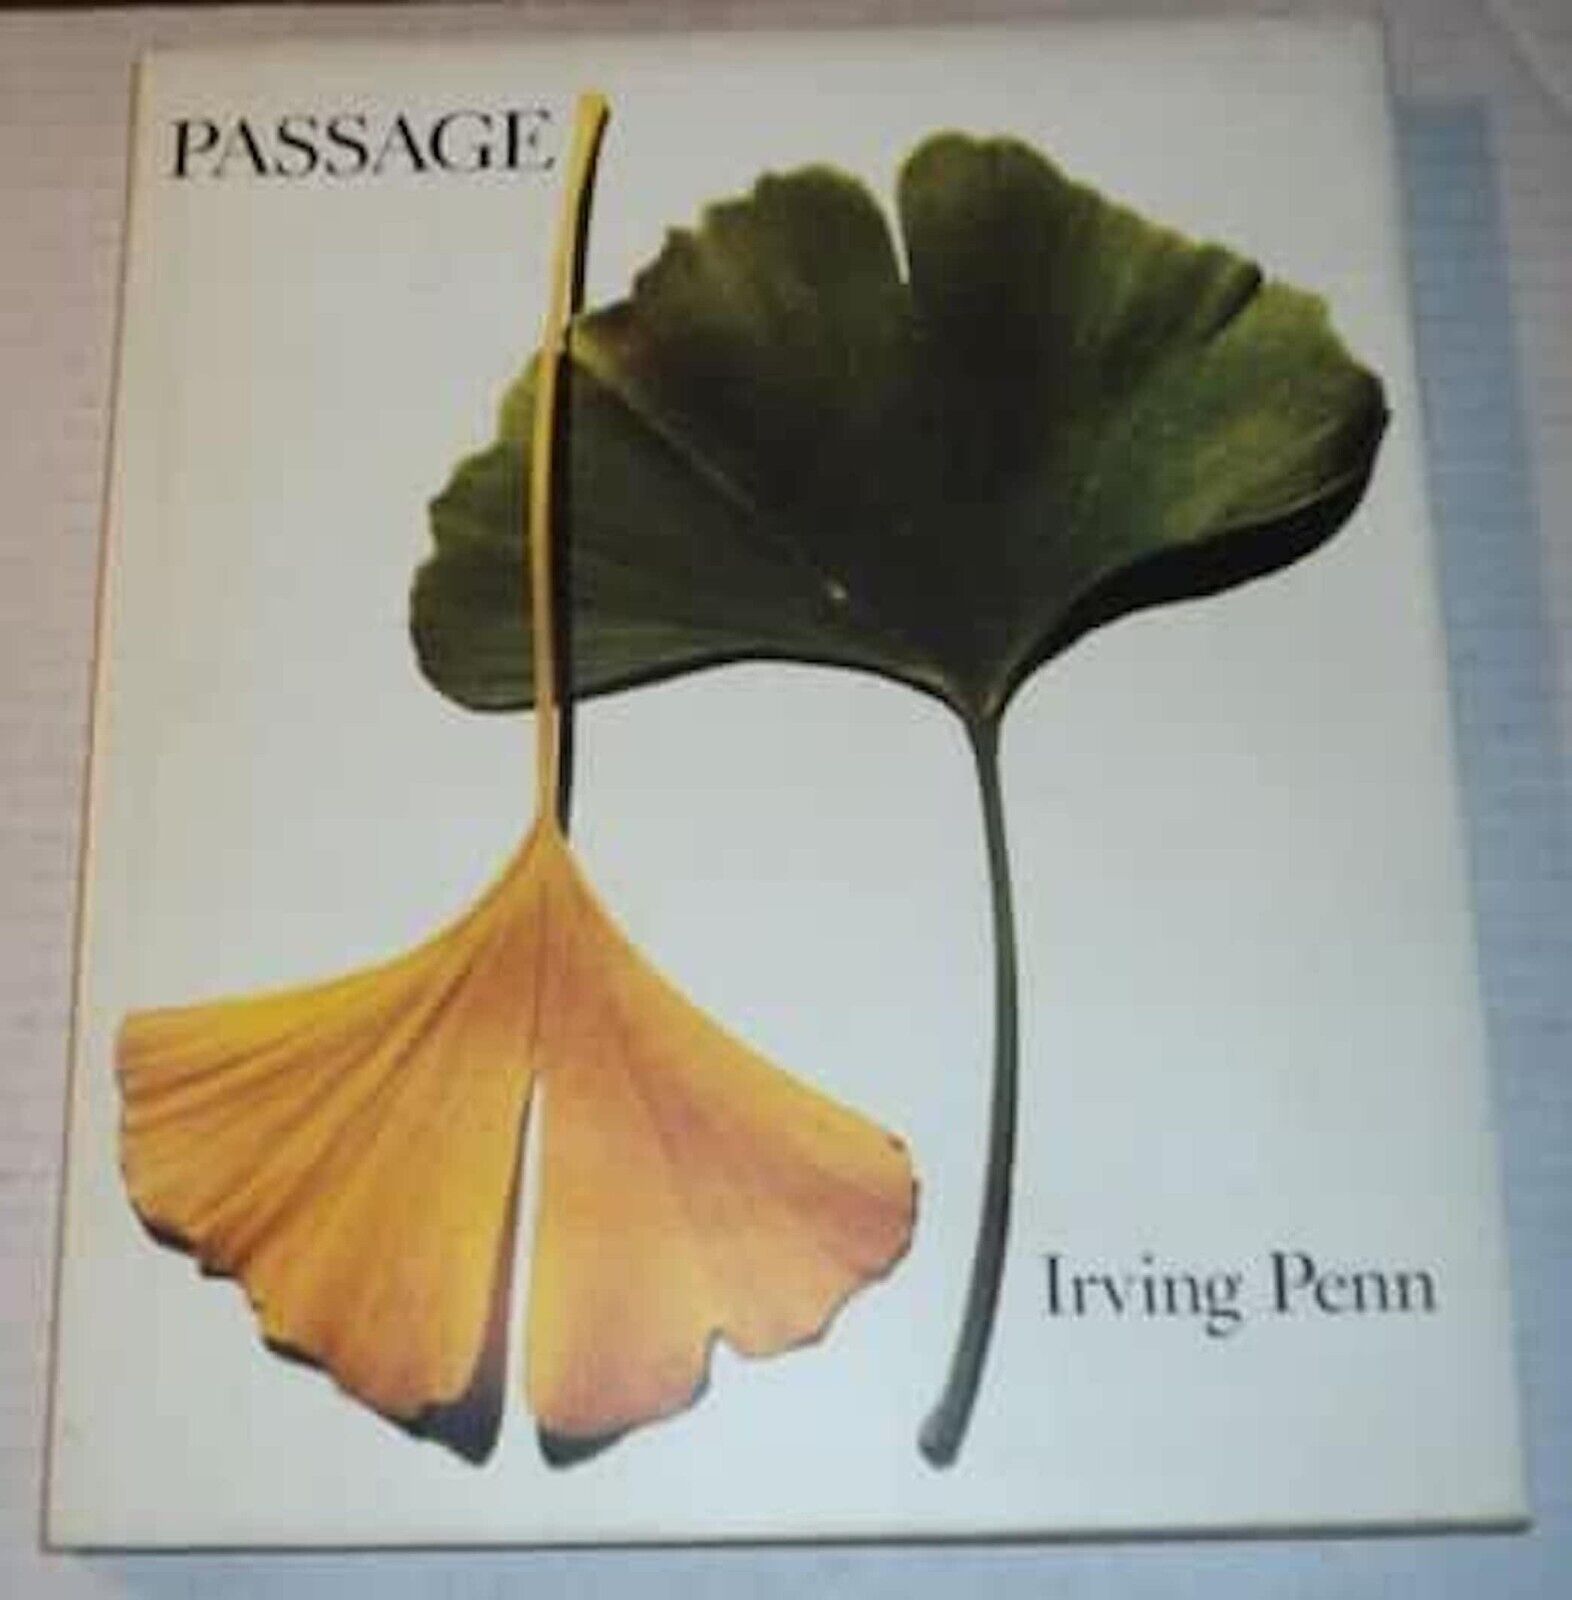 IRVING PENN's....PASSAGE.....a WORK RECORD......SIGNED 1991 RANDOM HOUSE